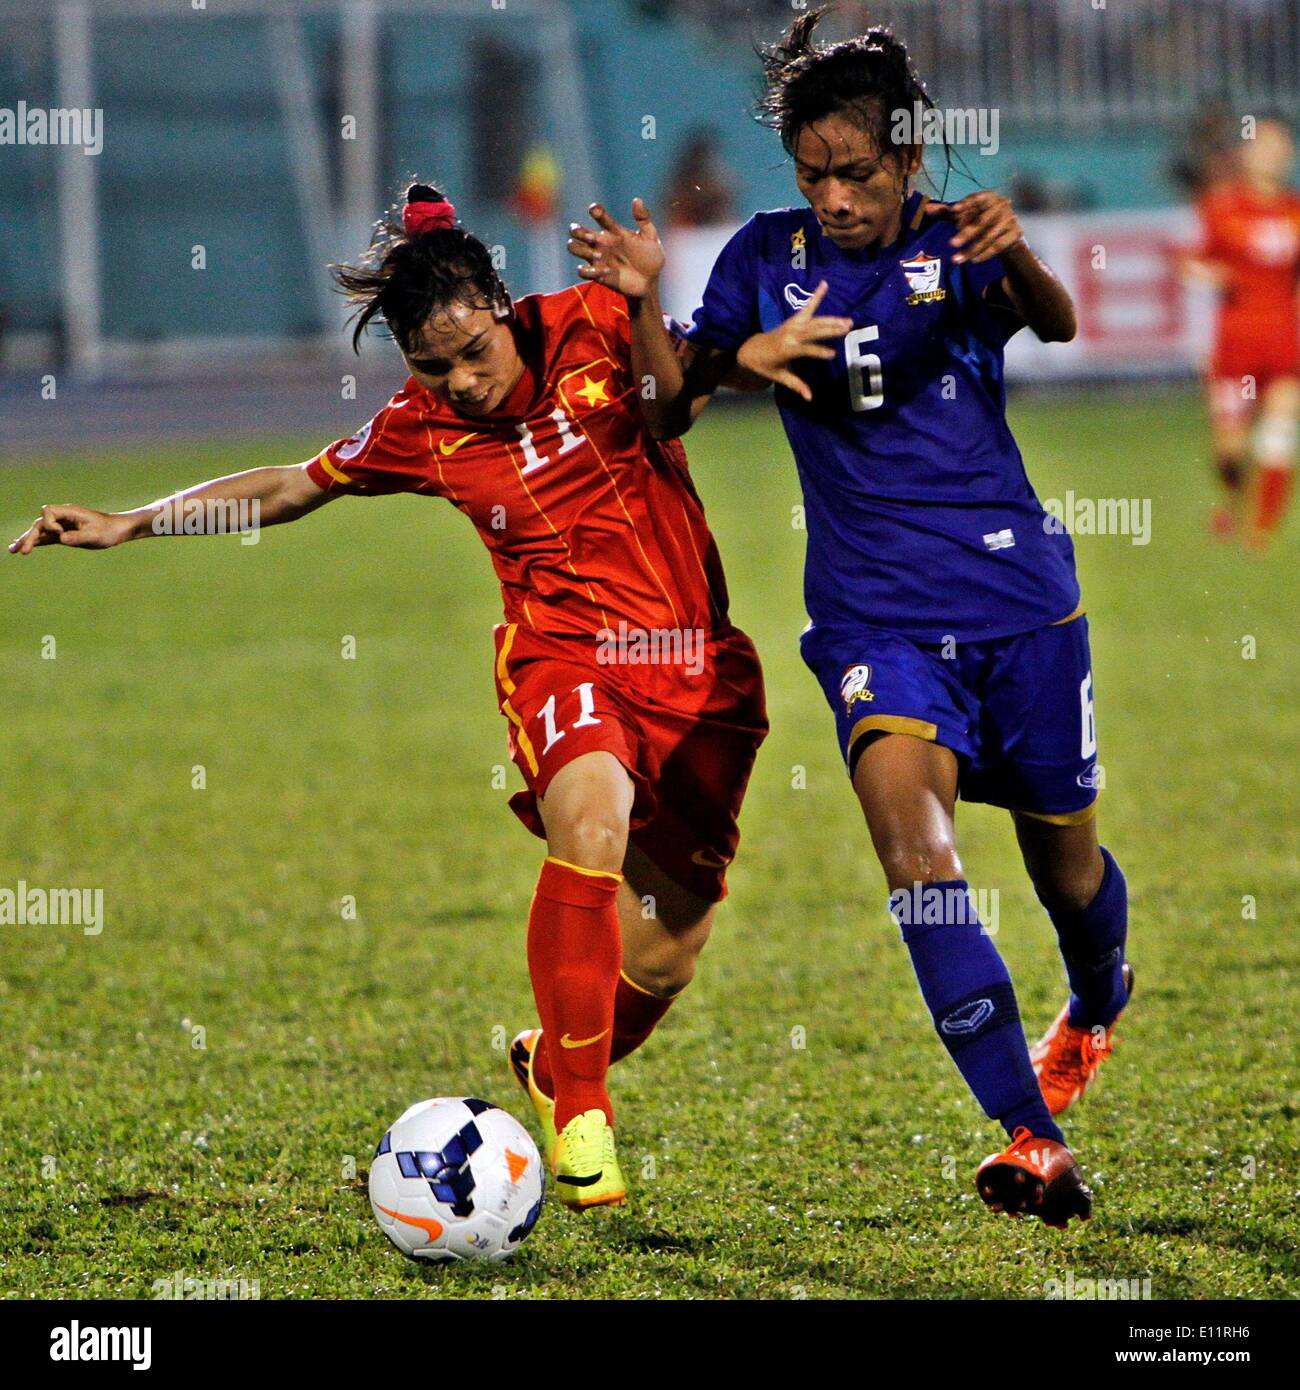 Ho Chi Minh City, Vietnam. 21st May, 2014. Khueanpet (R) of Thailand vies for the ball during the match against Vietnam at the 2014 Women's AFC Cup held at Thong Nhat Stadium in Ho Chi Minh city, Vietnam, May 21, 2014. Thailand advanced to 2015 World Cup after beating Vietnam 2-1. © Nguyen Le Huyen/Xinhua/Alamy Live News Stock Photo